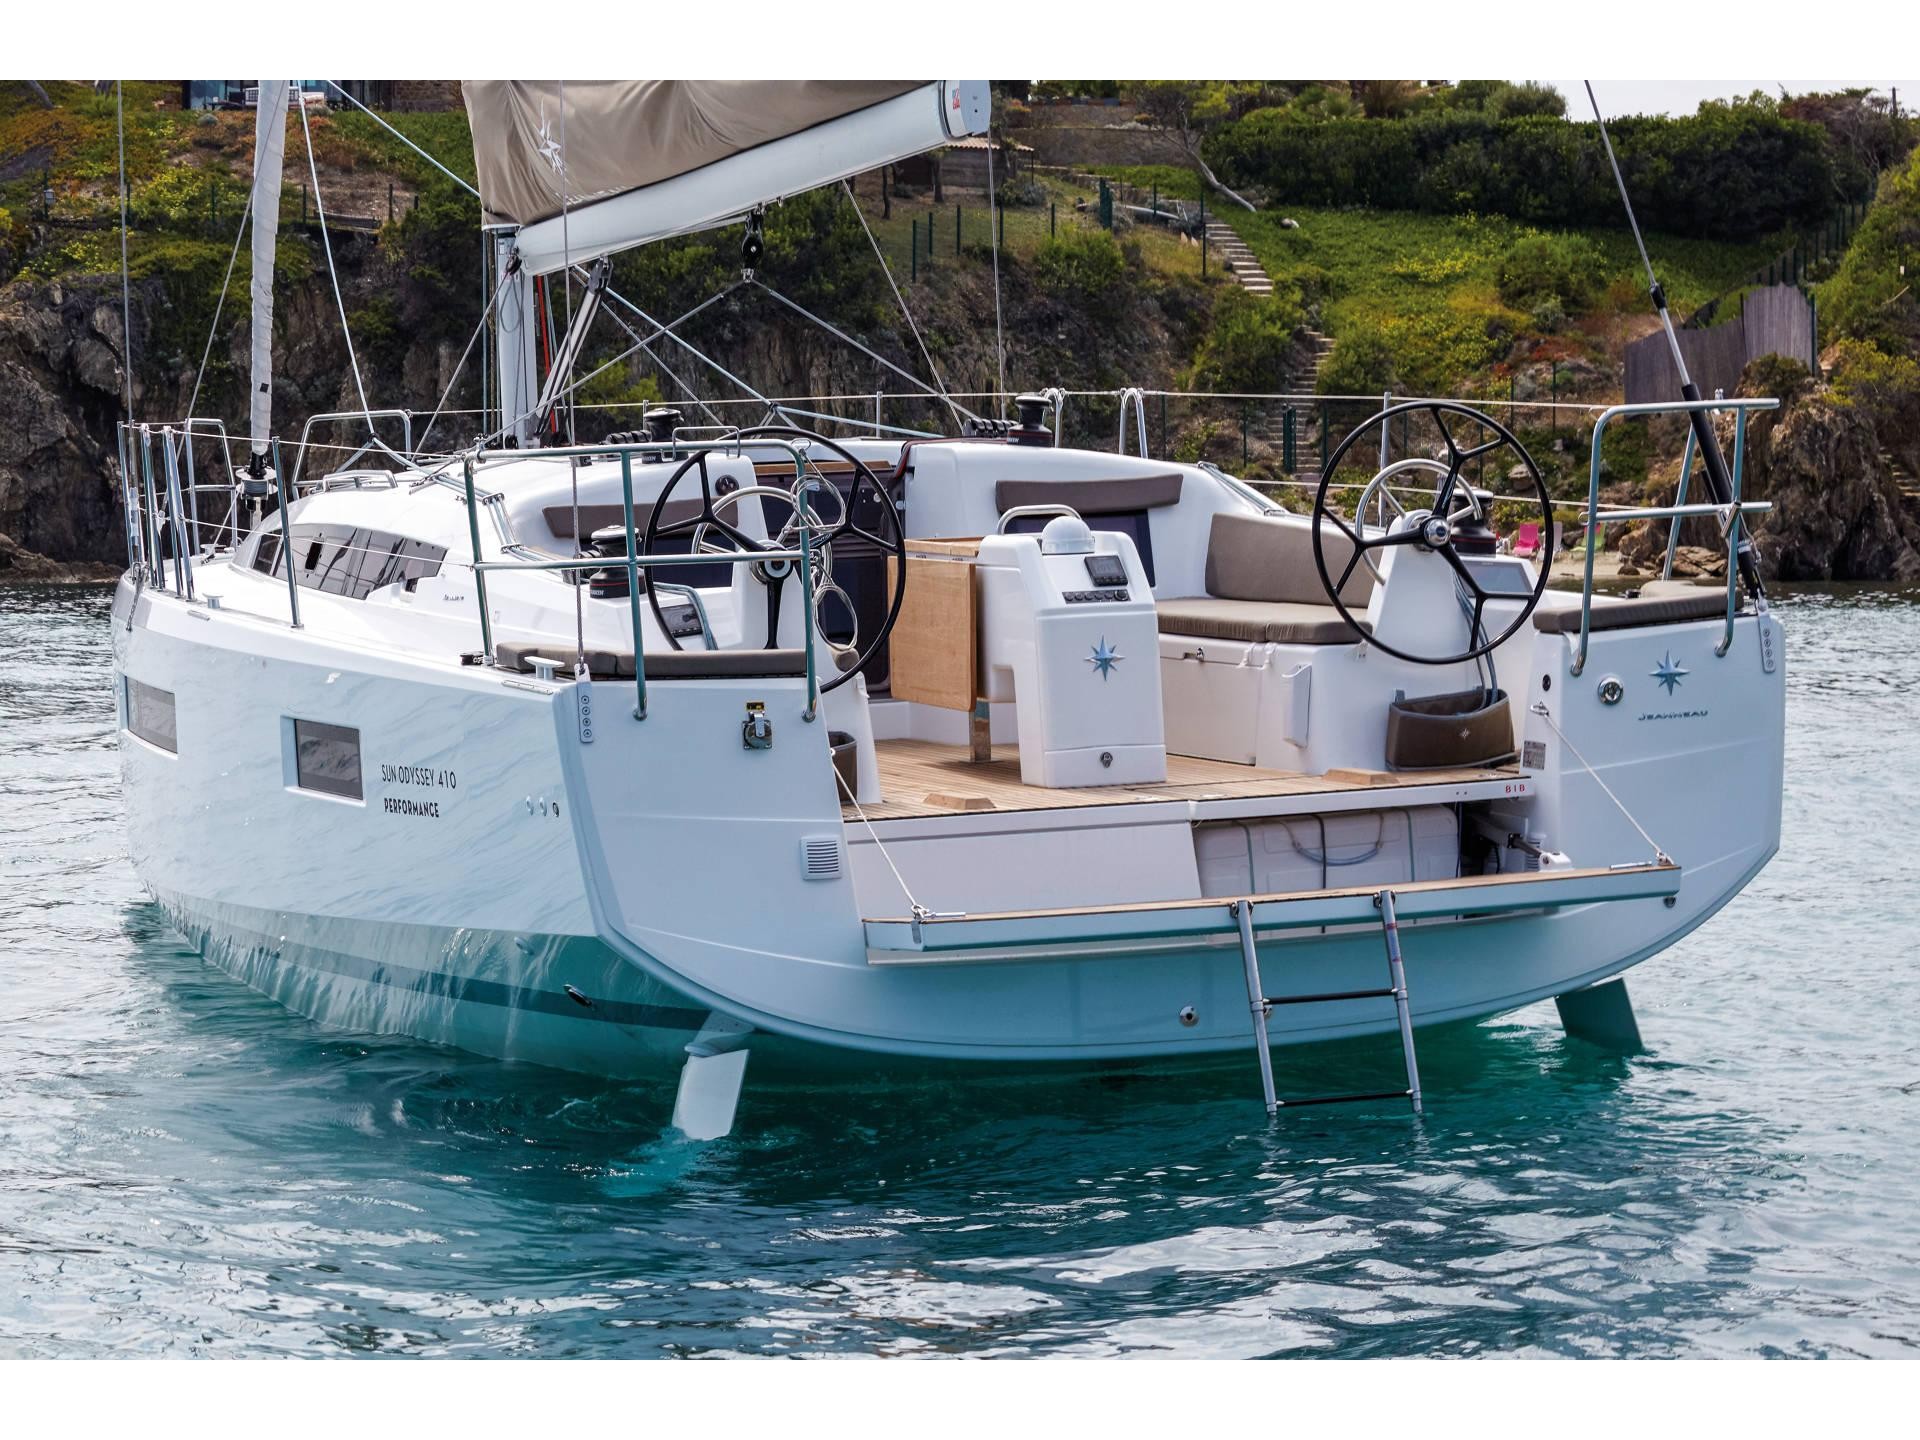 Sun Odyssey 410 - Alimos Yacht Charter & Boat hire in Greece Athens and Saronic Gulf Athens Alimos Alimos Marina 1